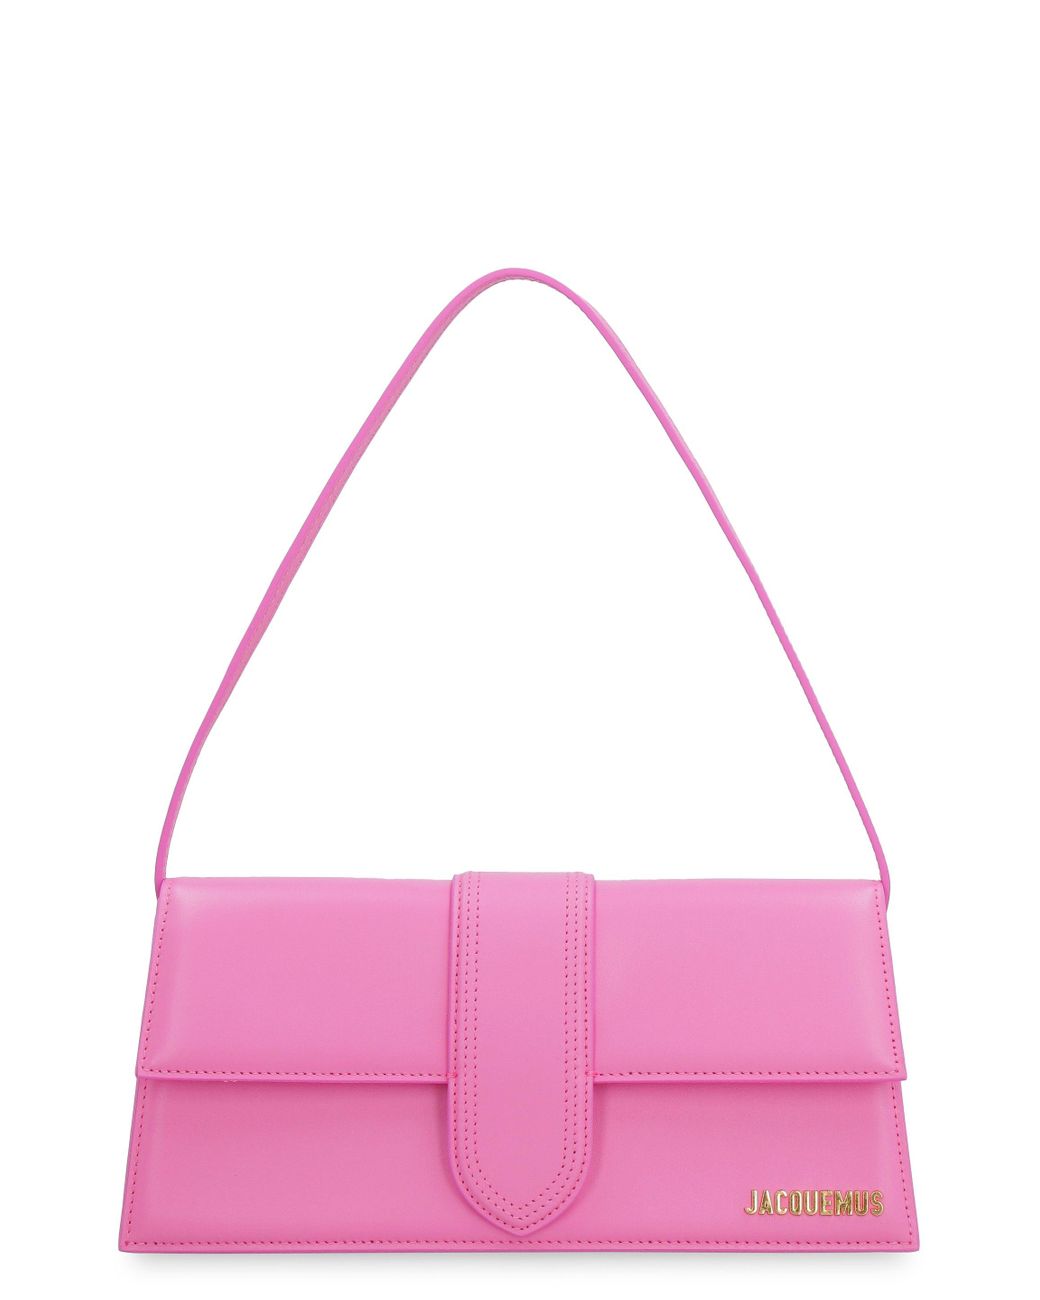 Jacquemus Le Bambino Long Leather Shoulder Bag in Pink | Lyst